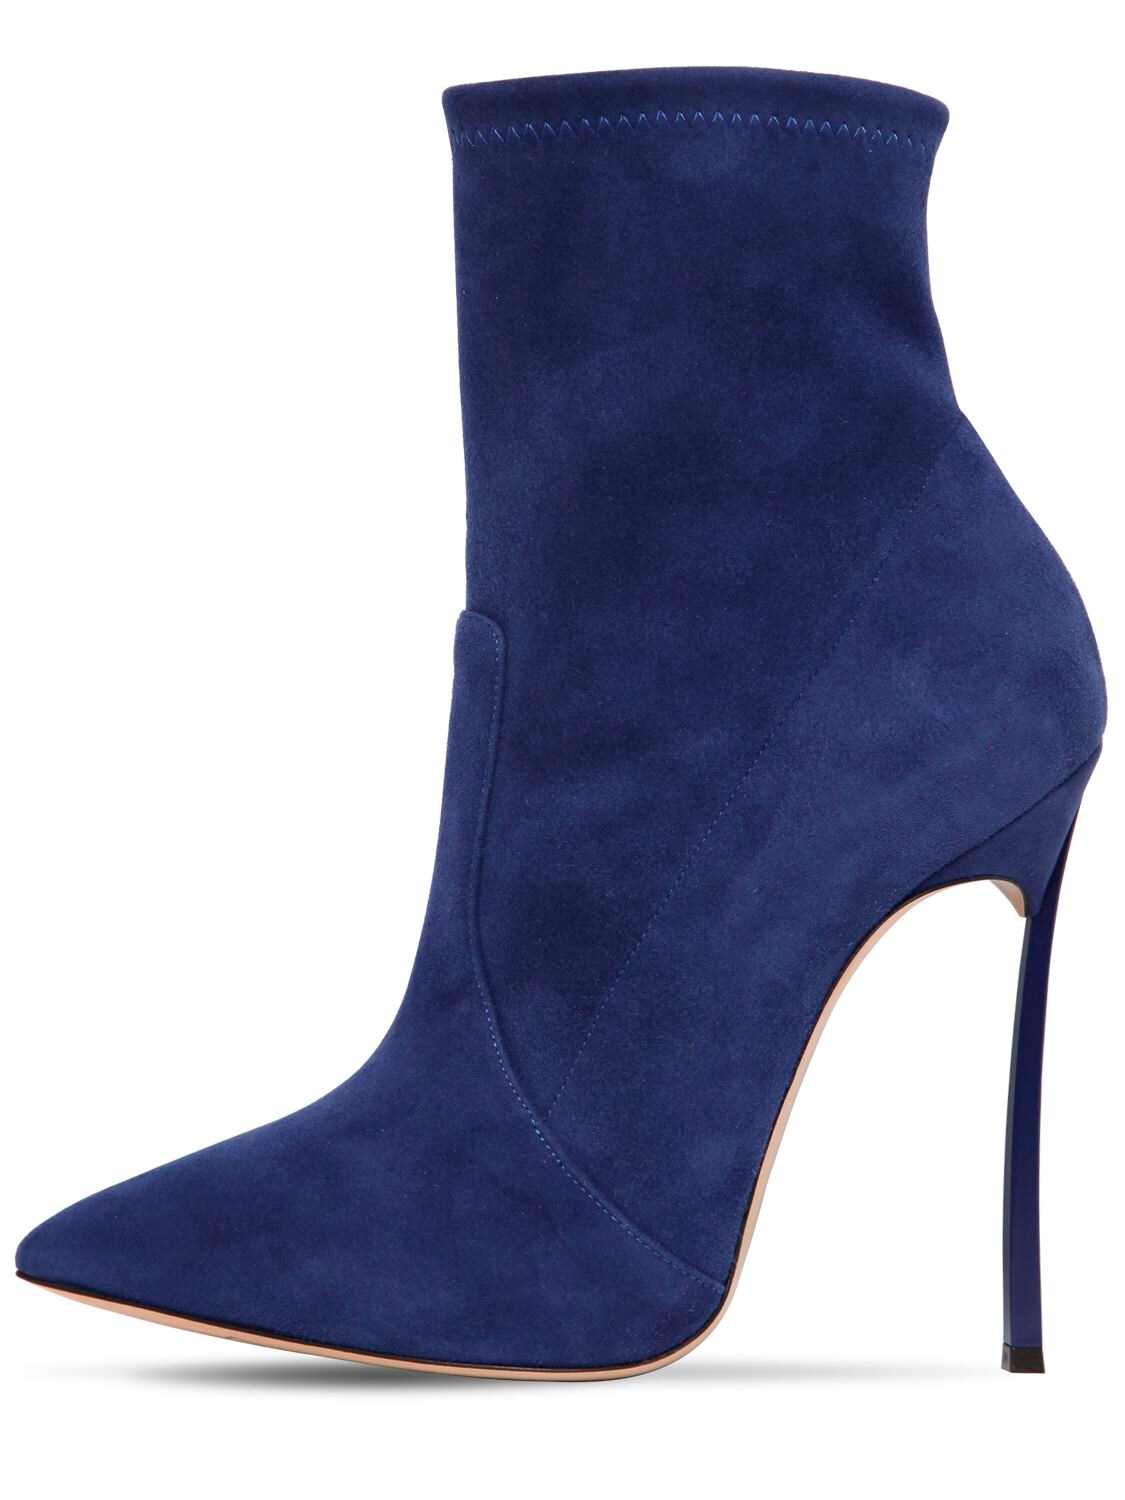 CASADEI 120MM BLADE STRETCH SUEDE ANKLE BOOTS,68IAIM011-NTYWNW2